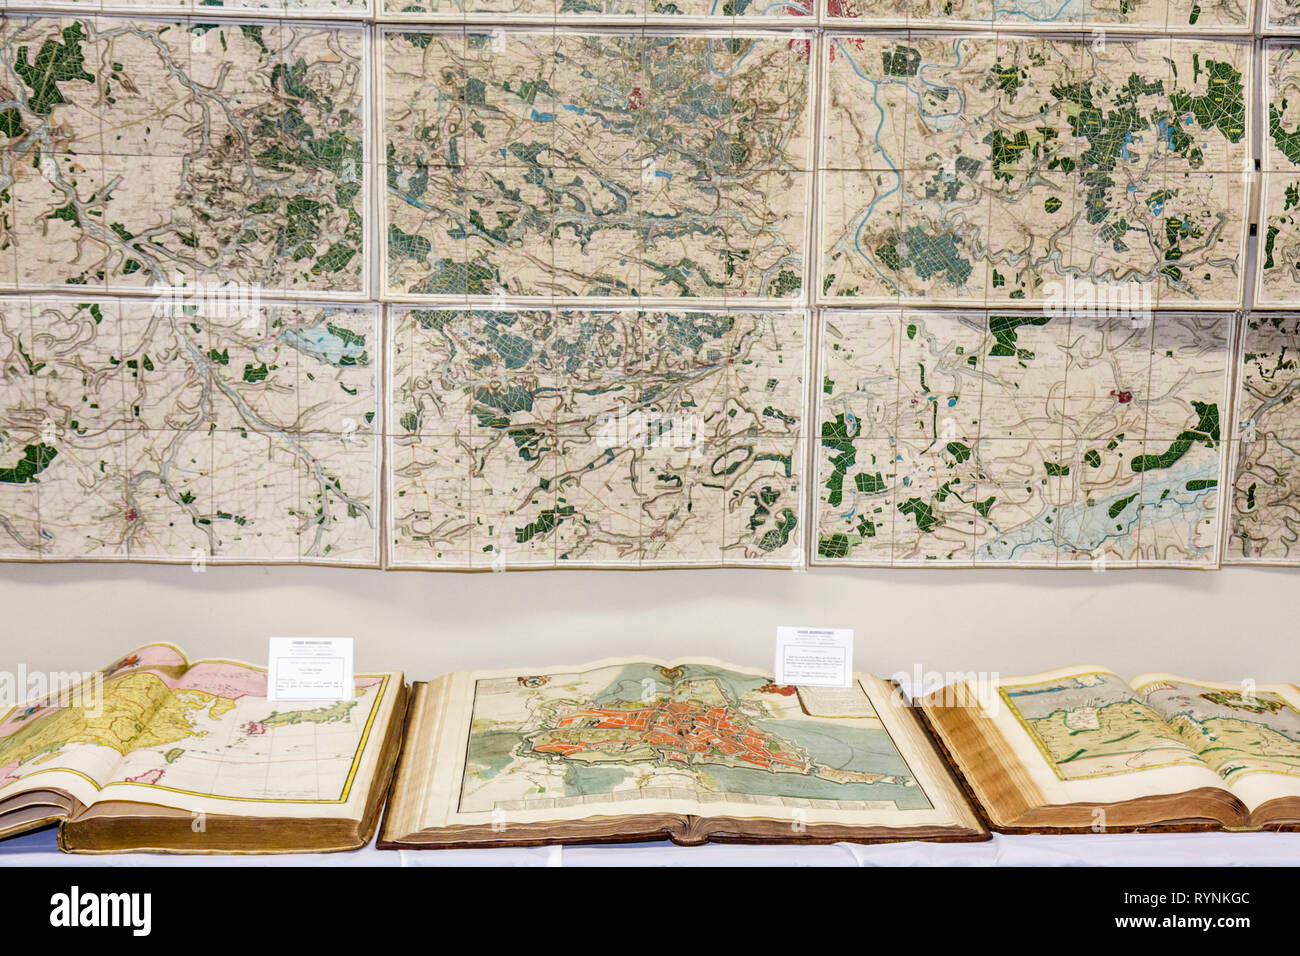 Miami Florida,historical Museum of SouthernMiami Florida,International Map Fair,antique maps,dealers,collectors,hobby,rare,cartography,geography,book, Stock Photo